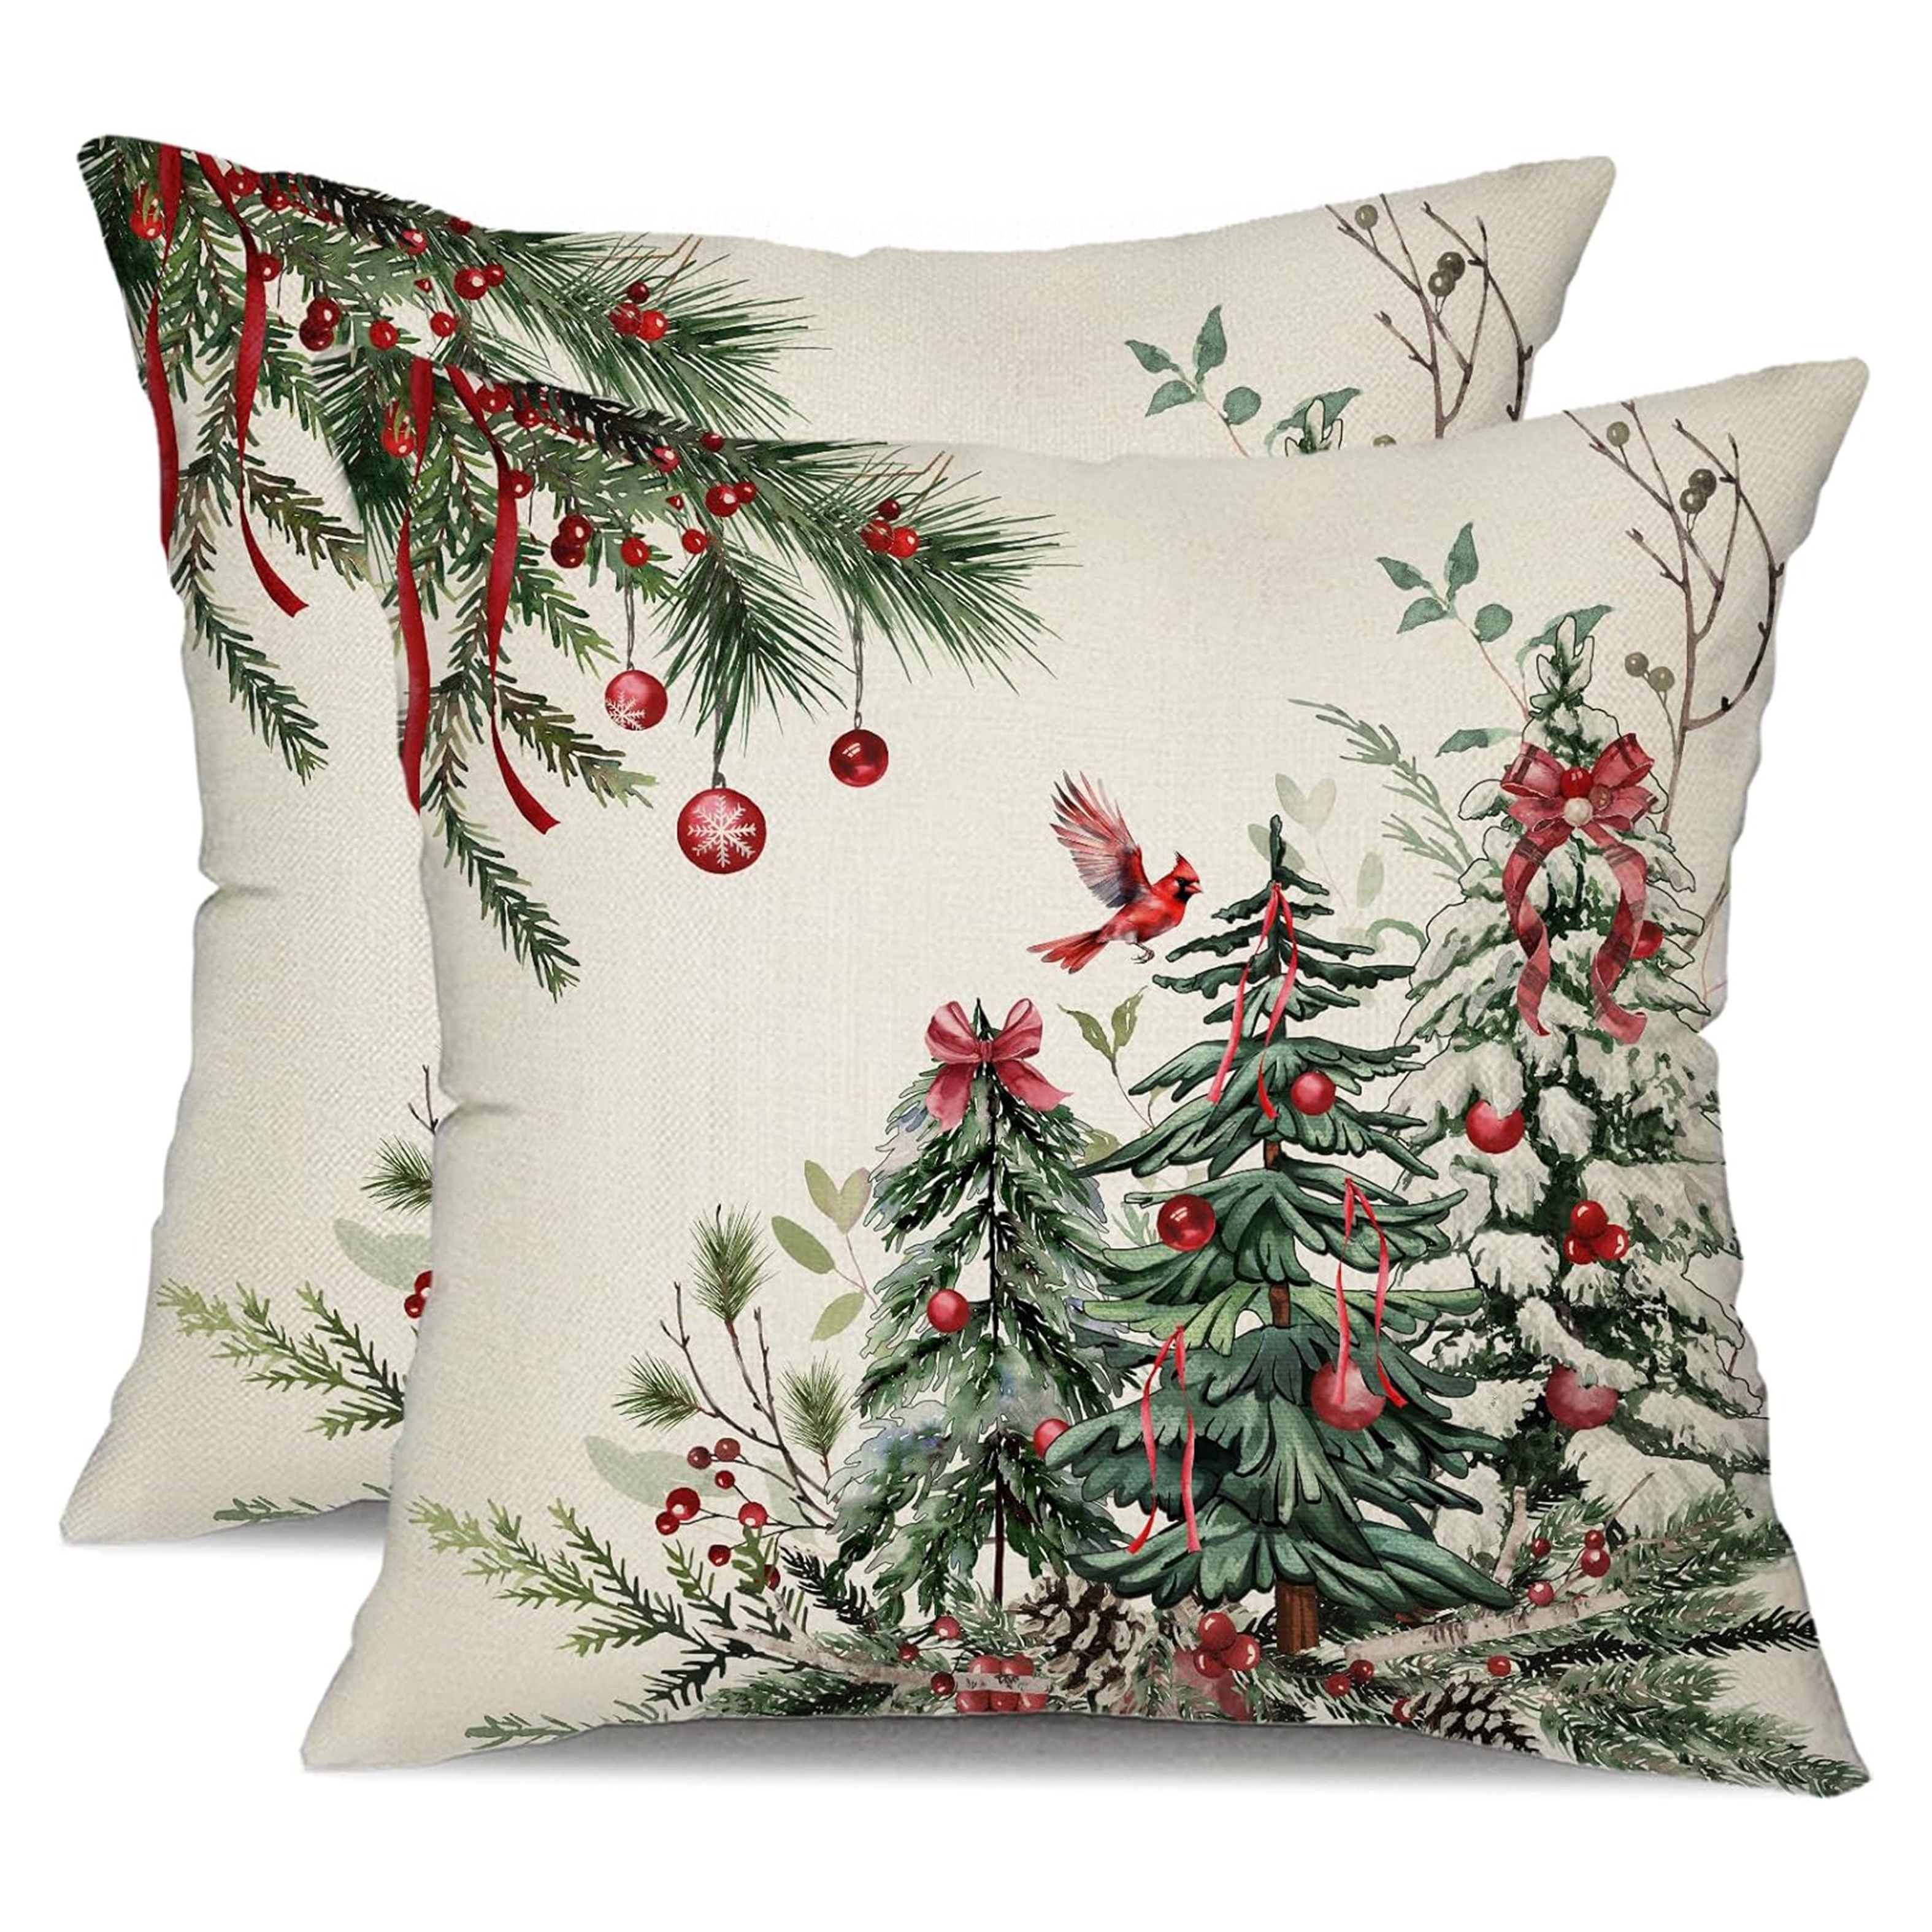 

Festive Linen Christmas Pillow Covers - No Pillow Core, 16x16/18x18/20x20inch, Contemporary Style, Machine Washable, Zipper Closure, Suitable For Various Bed Sizes, Linen Fabric